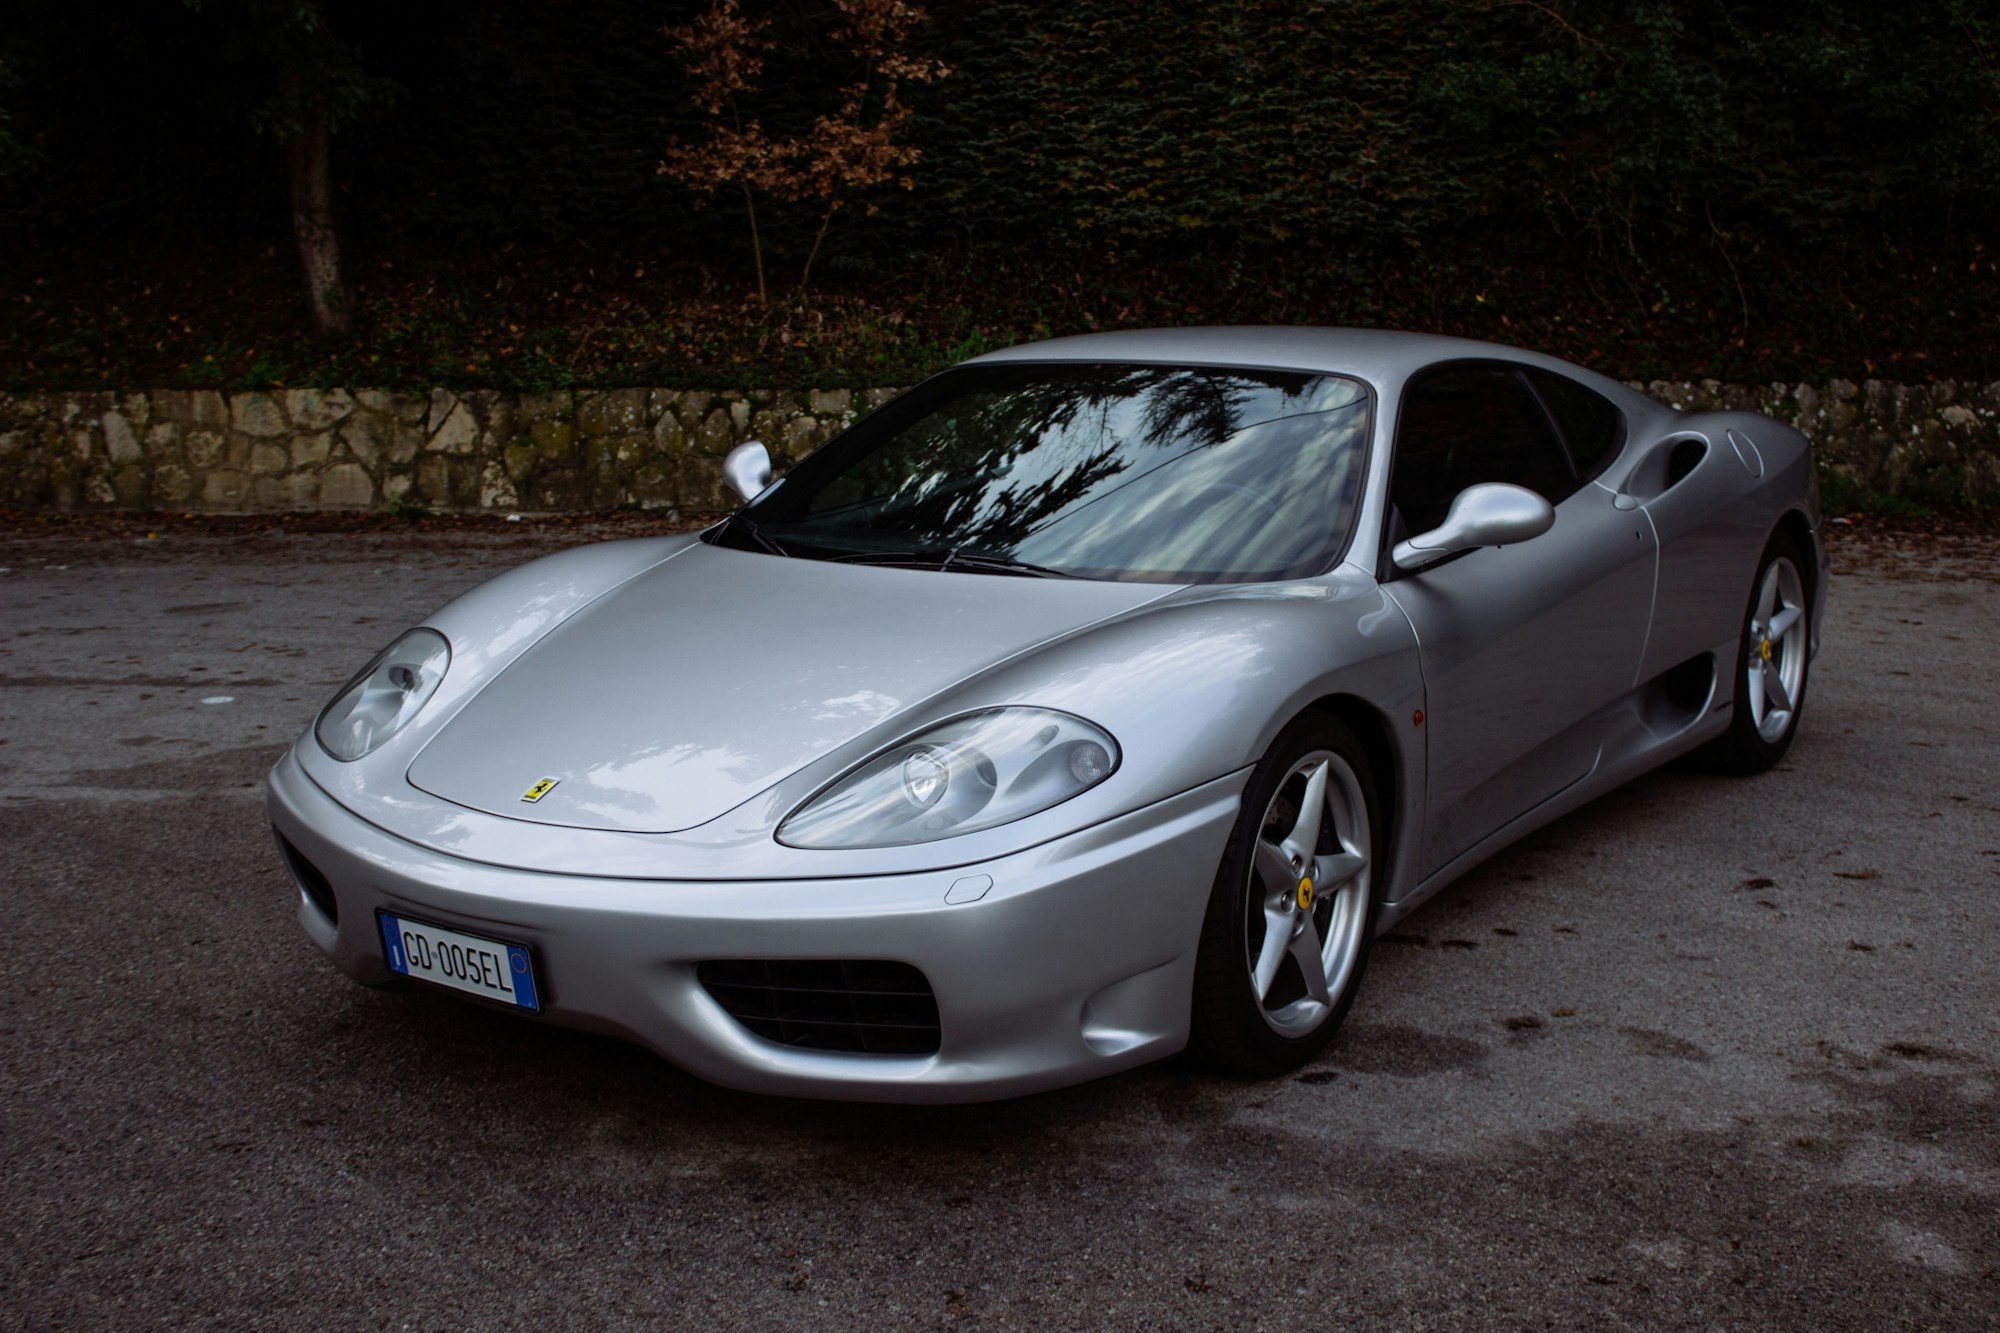 2001 Ferrari 360 Modena - Manual for sale by auction in Potenza, Italy